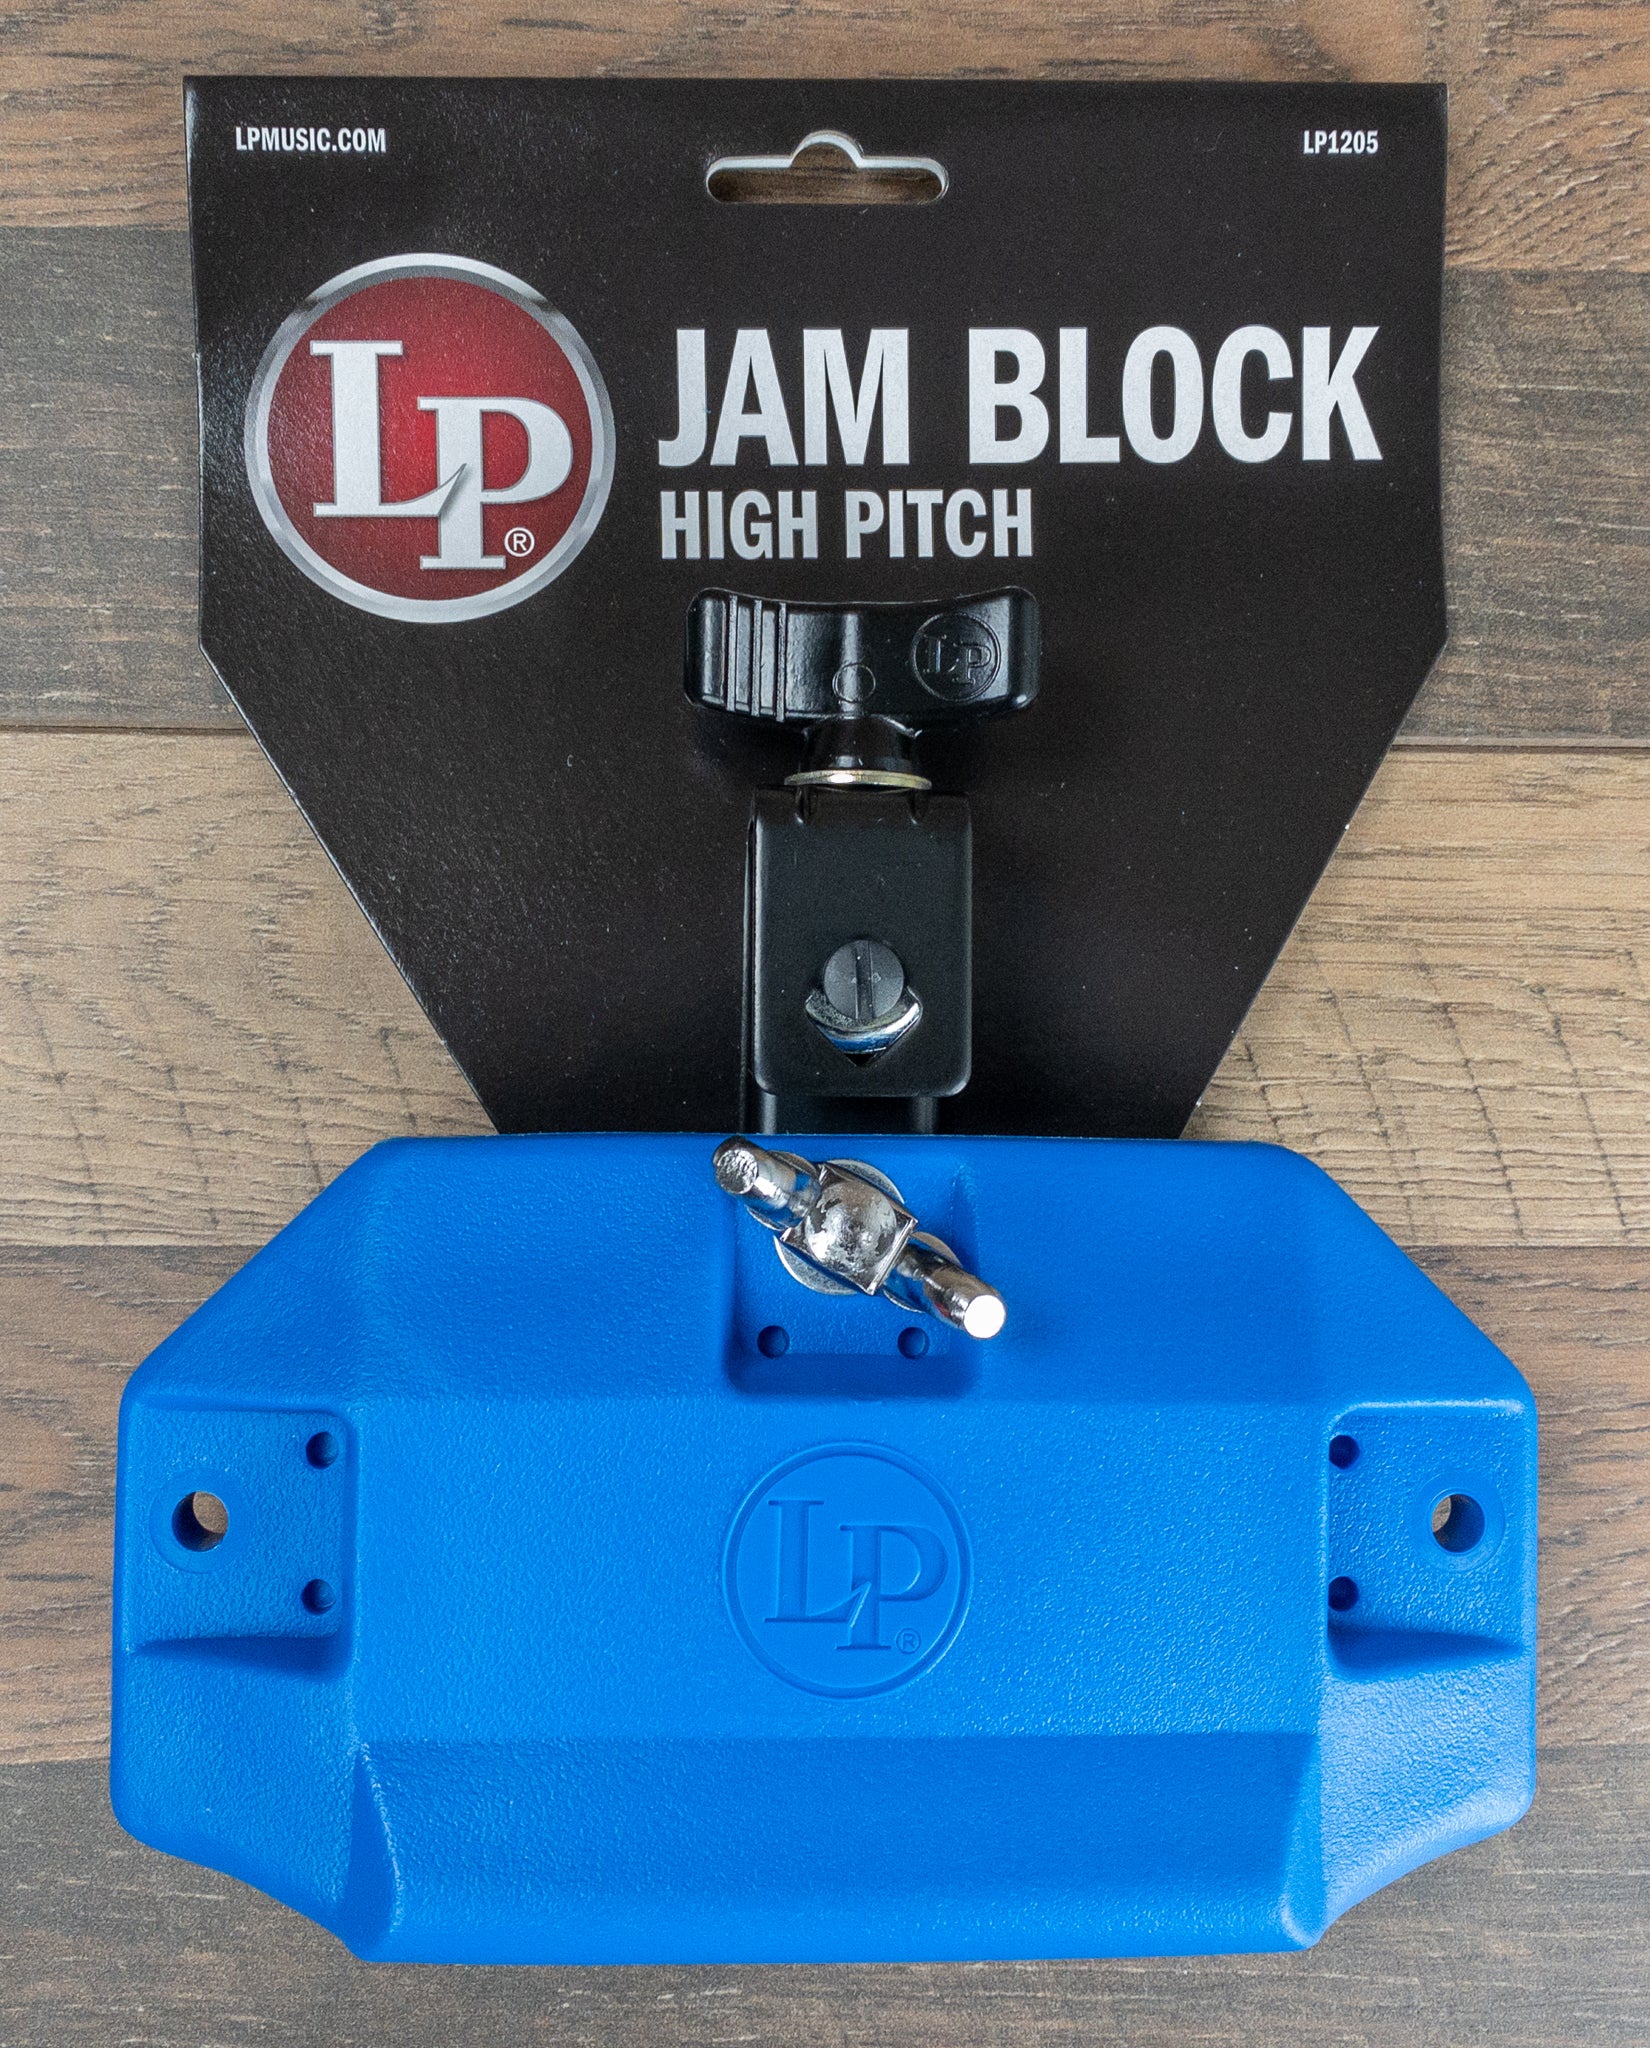 LP 1205 Jam Block High Pitch from Latin Percussion Includes Clamp - Blue